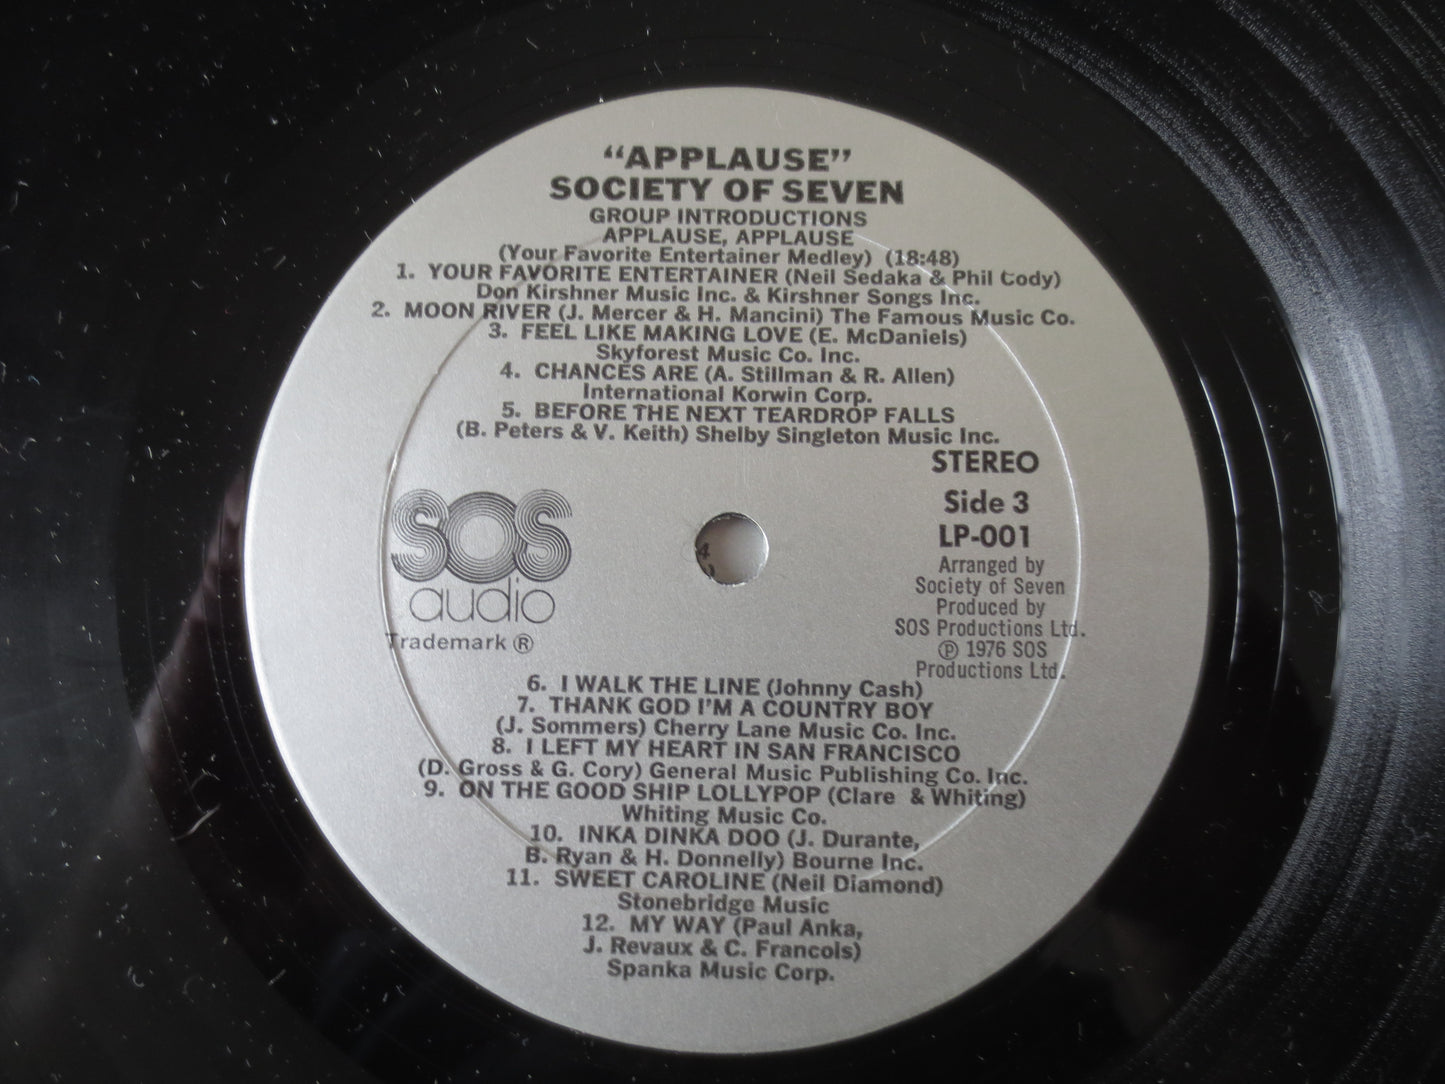 SOCIETY of SEVEN, APPLAUSE, 2 Records, Vintage Vinyl, Hawaiian Albums, Hawaiian Records, Hawaiian Music, Lps, 1976 Records